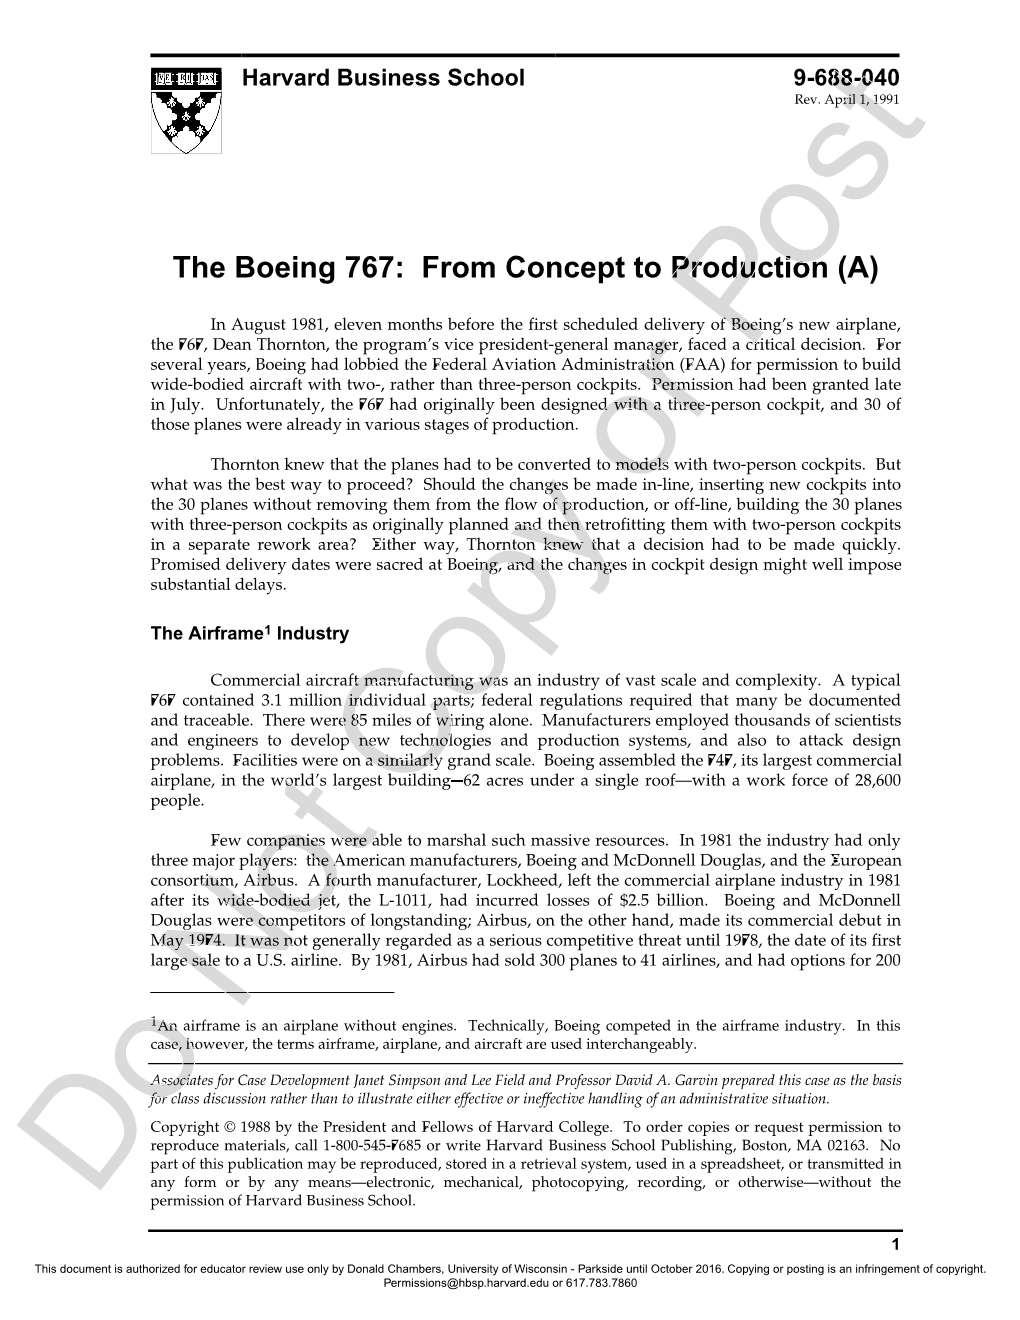 The Boeing 767: from Concept to Production (A)